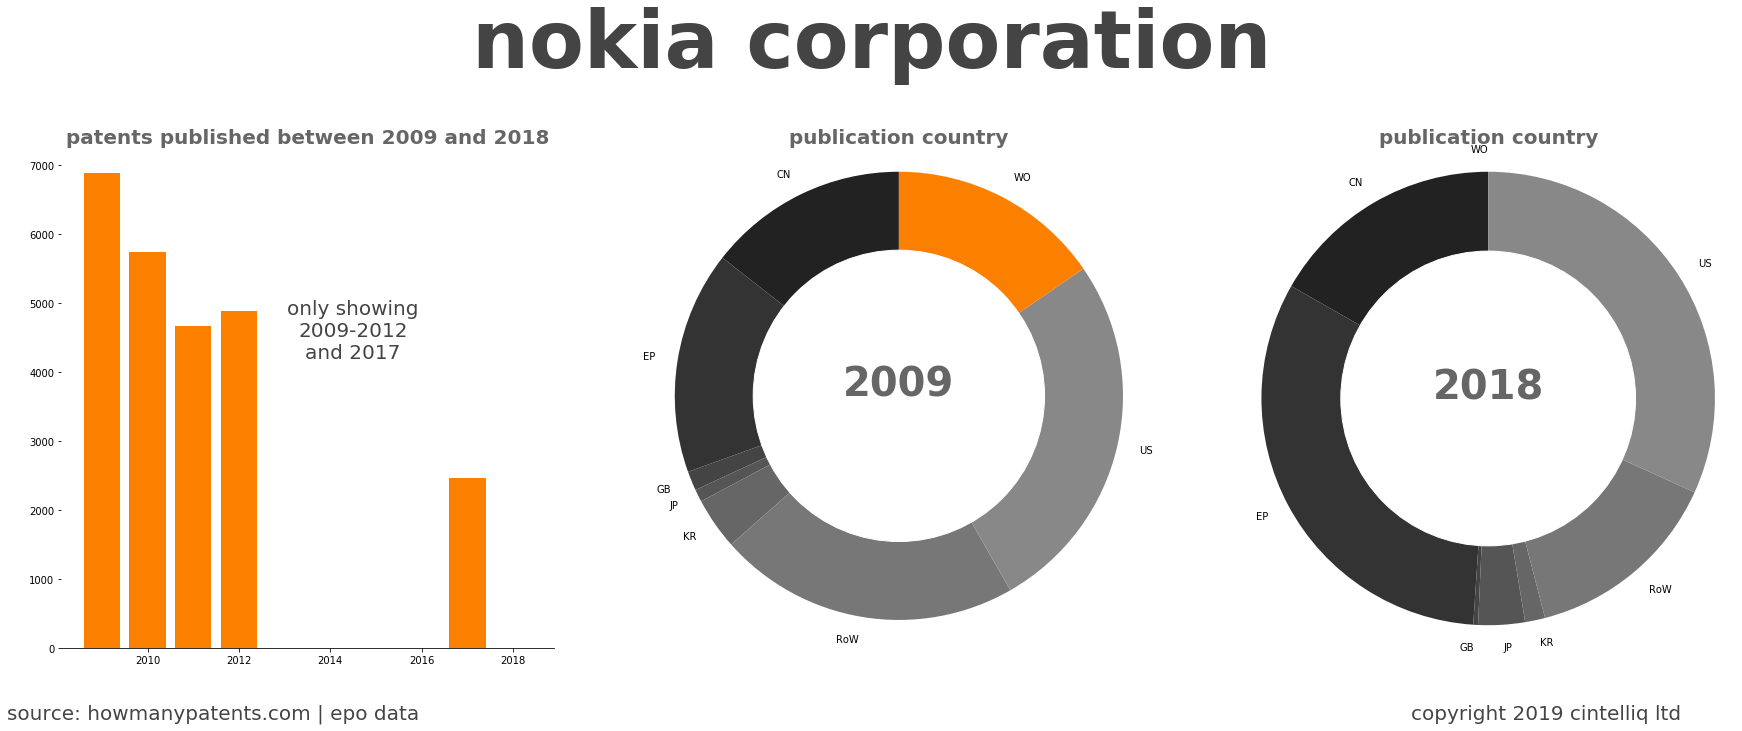 summary of patents for Nokia Corporation